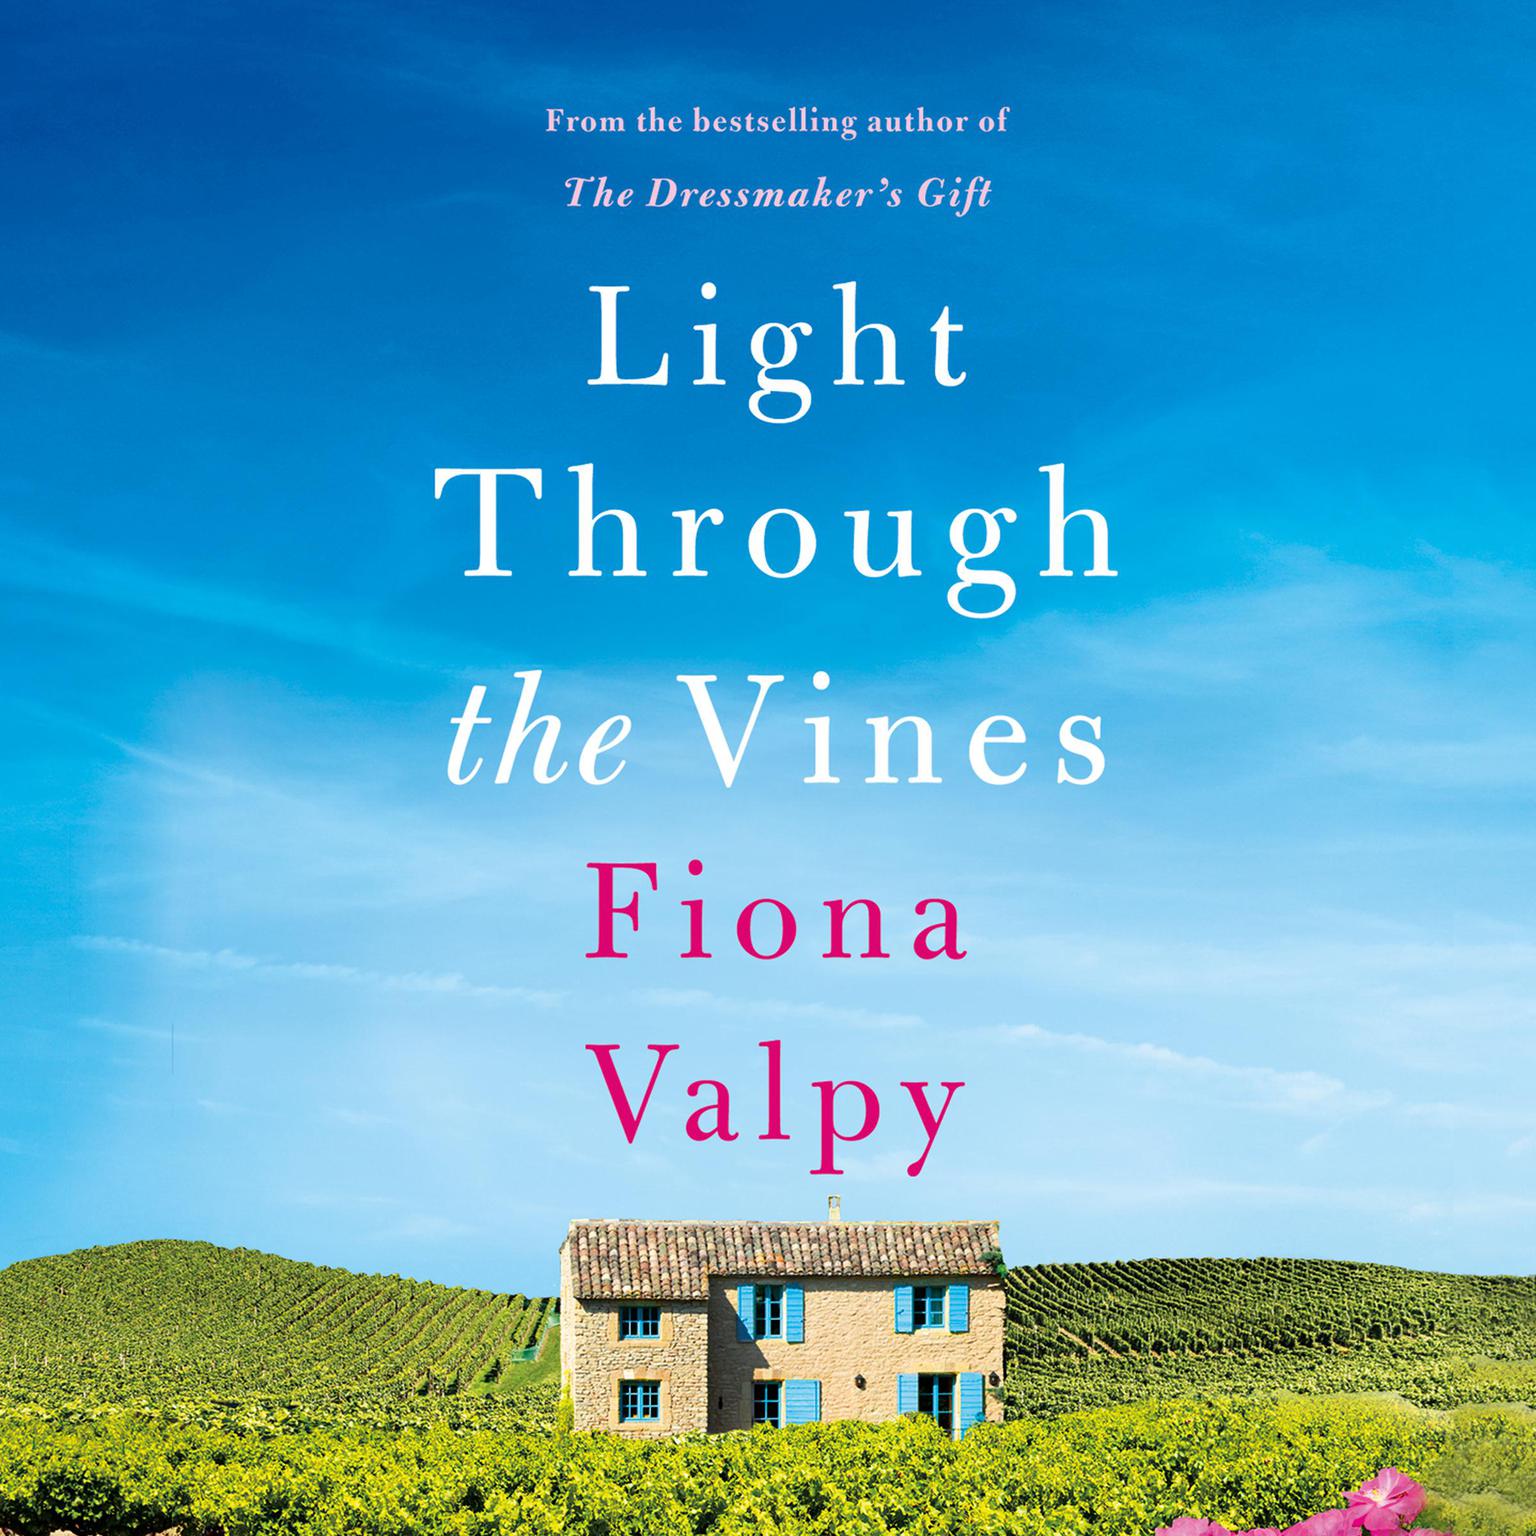 Light Through the Vines Audiobook, by Fiona Valpy